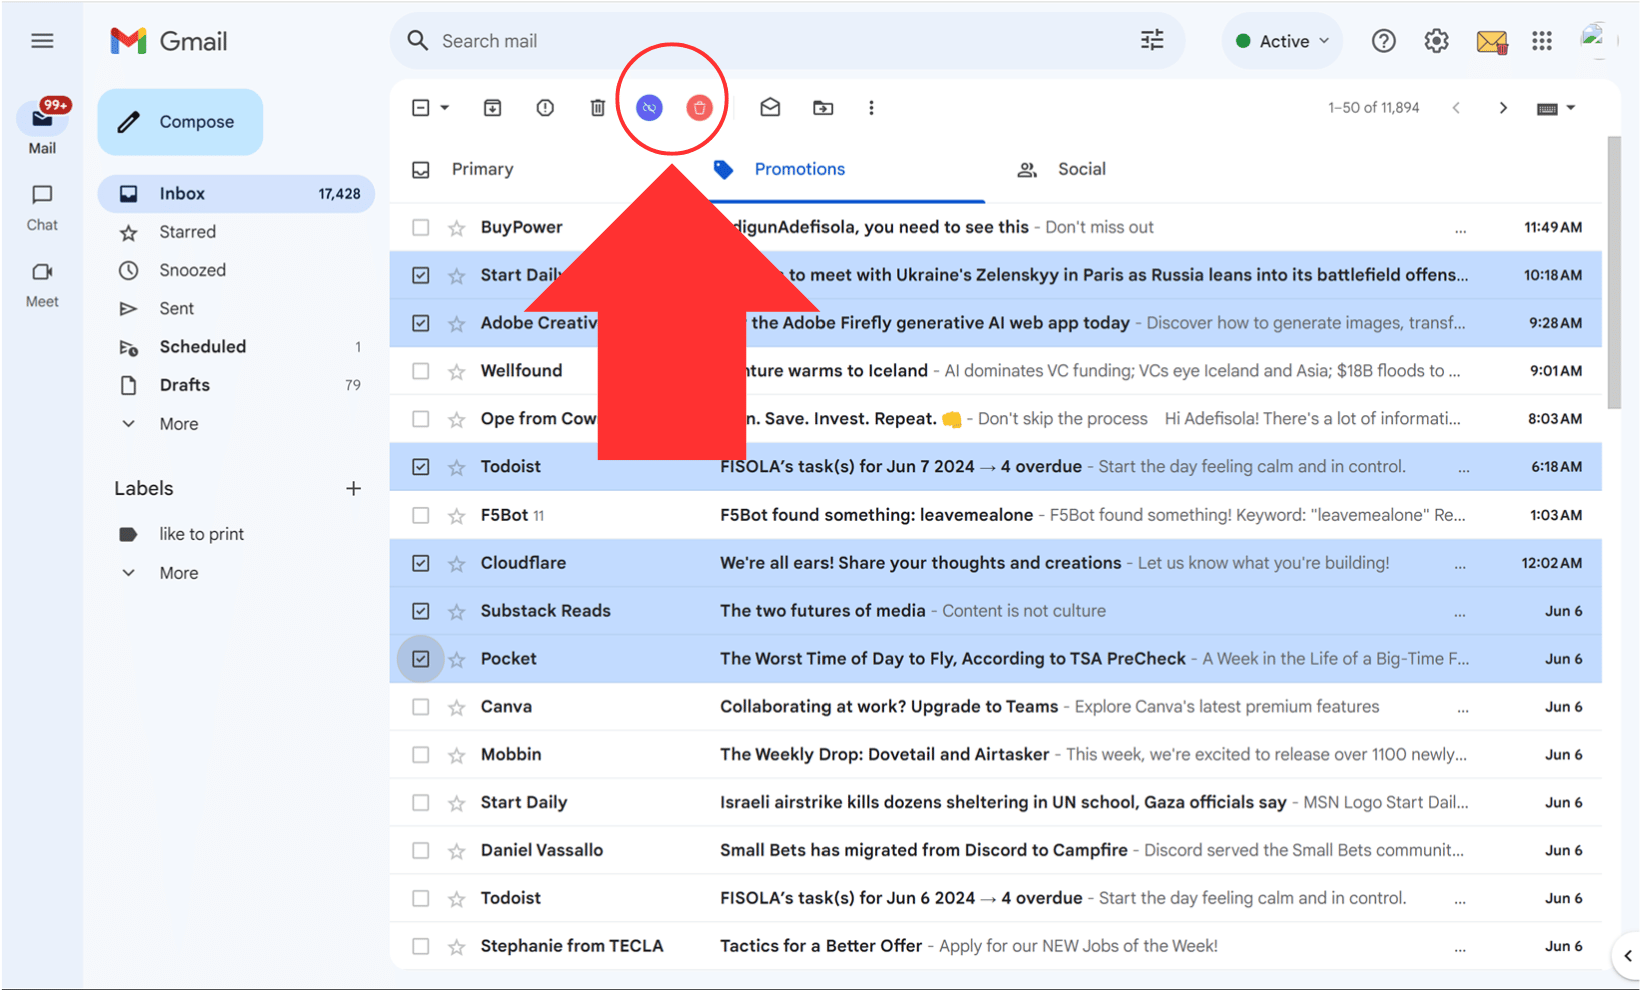 Mass unsubscribe using the Gmail native toolbar